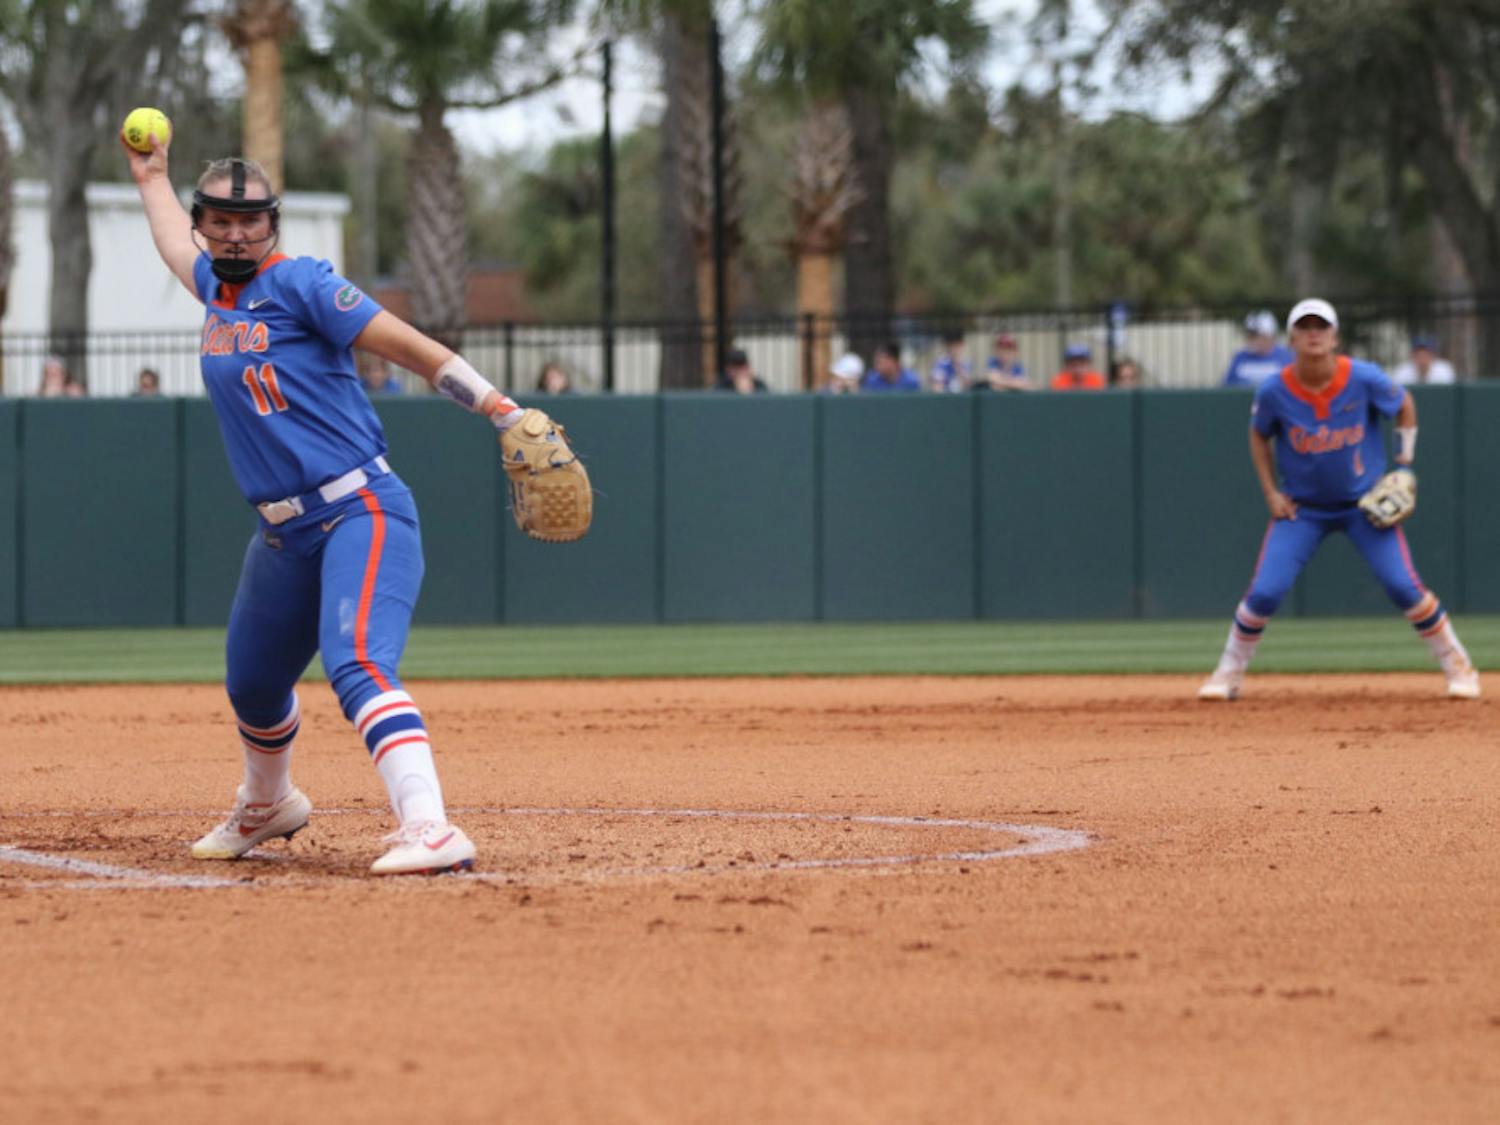 Kelly Barnhill allowed just one hit and two walks, while striking out 10 batters in the Gators 1-0 victory over Washington.